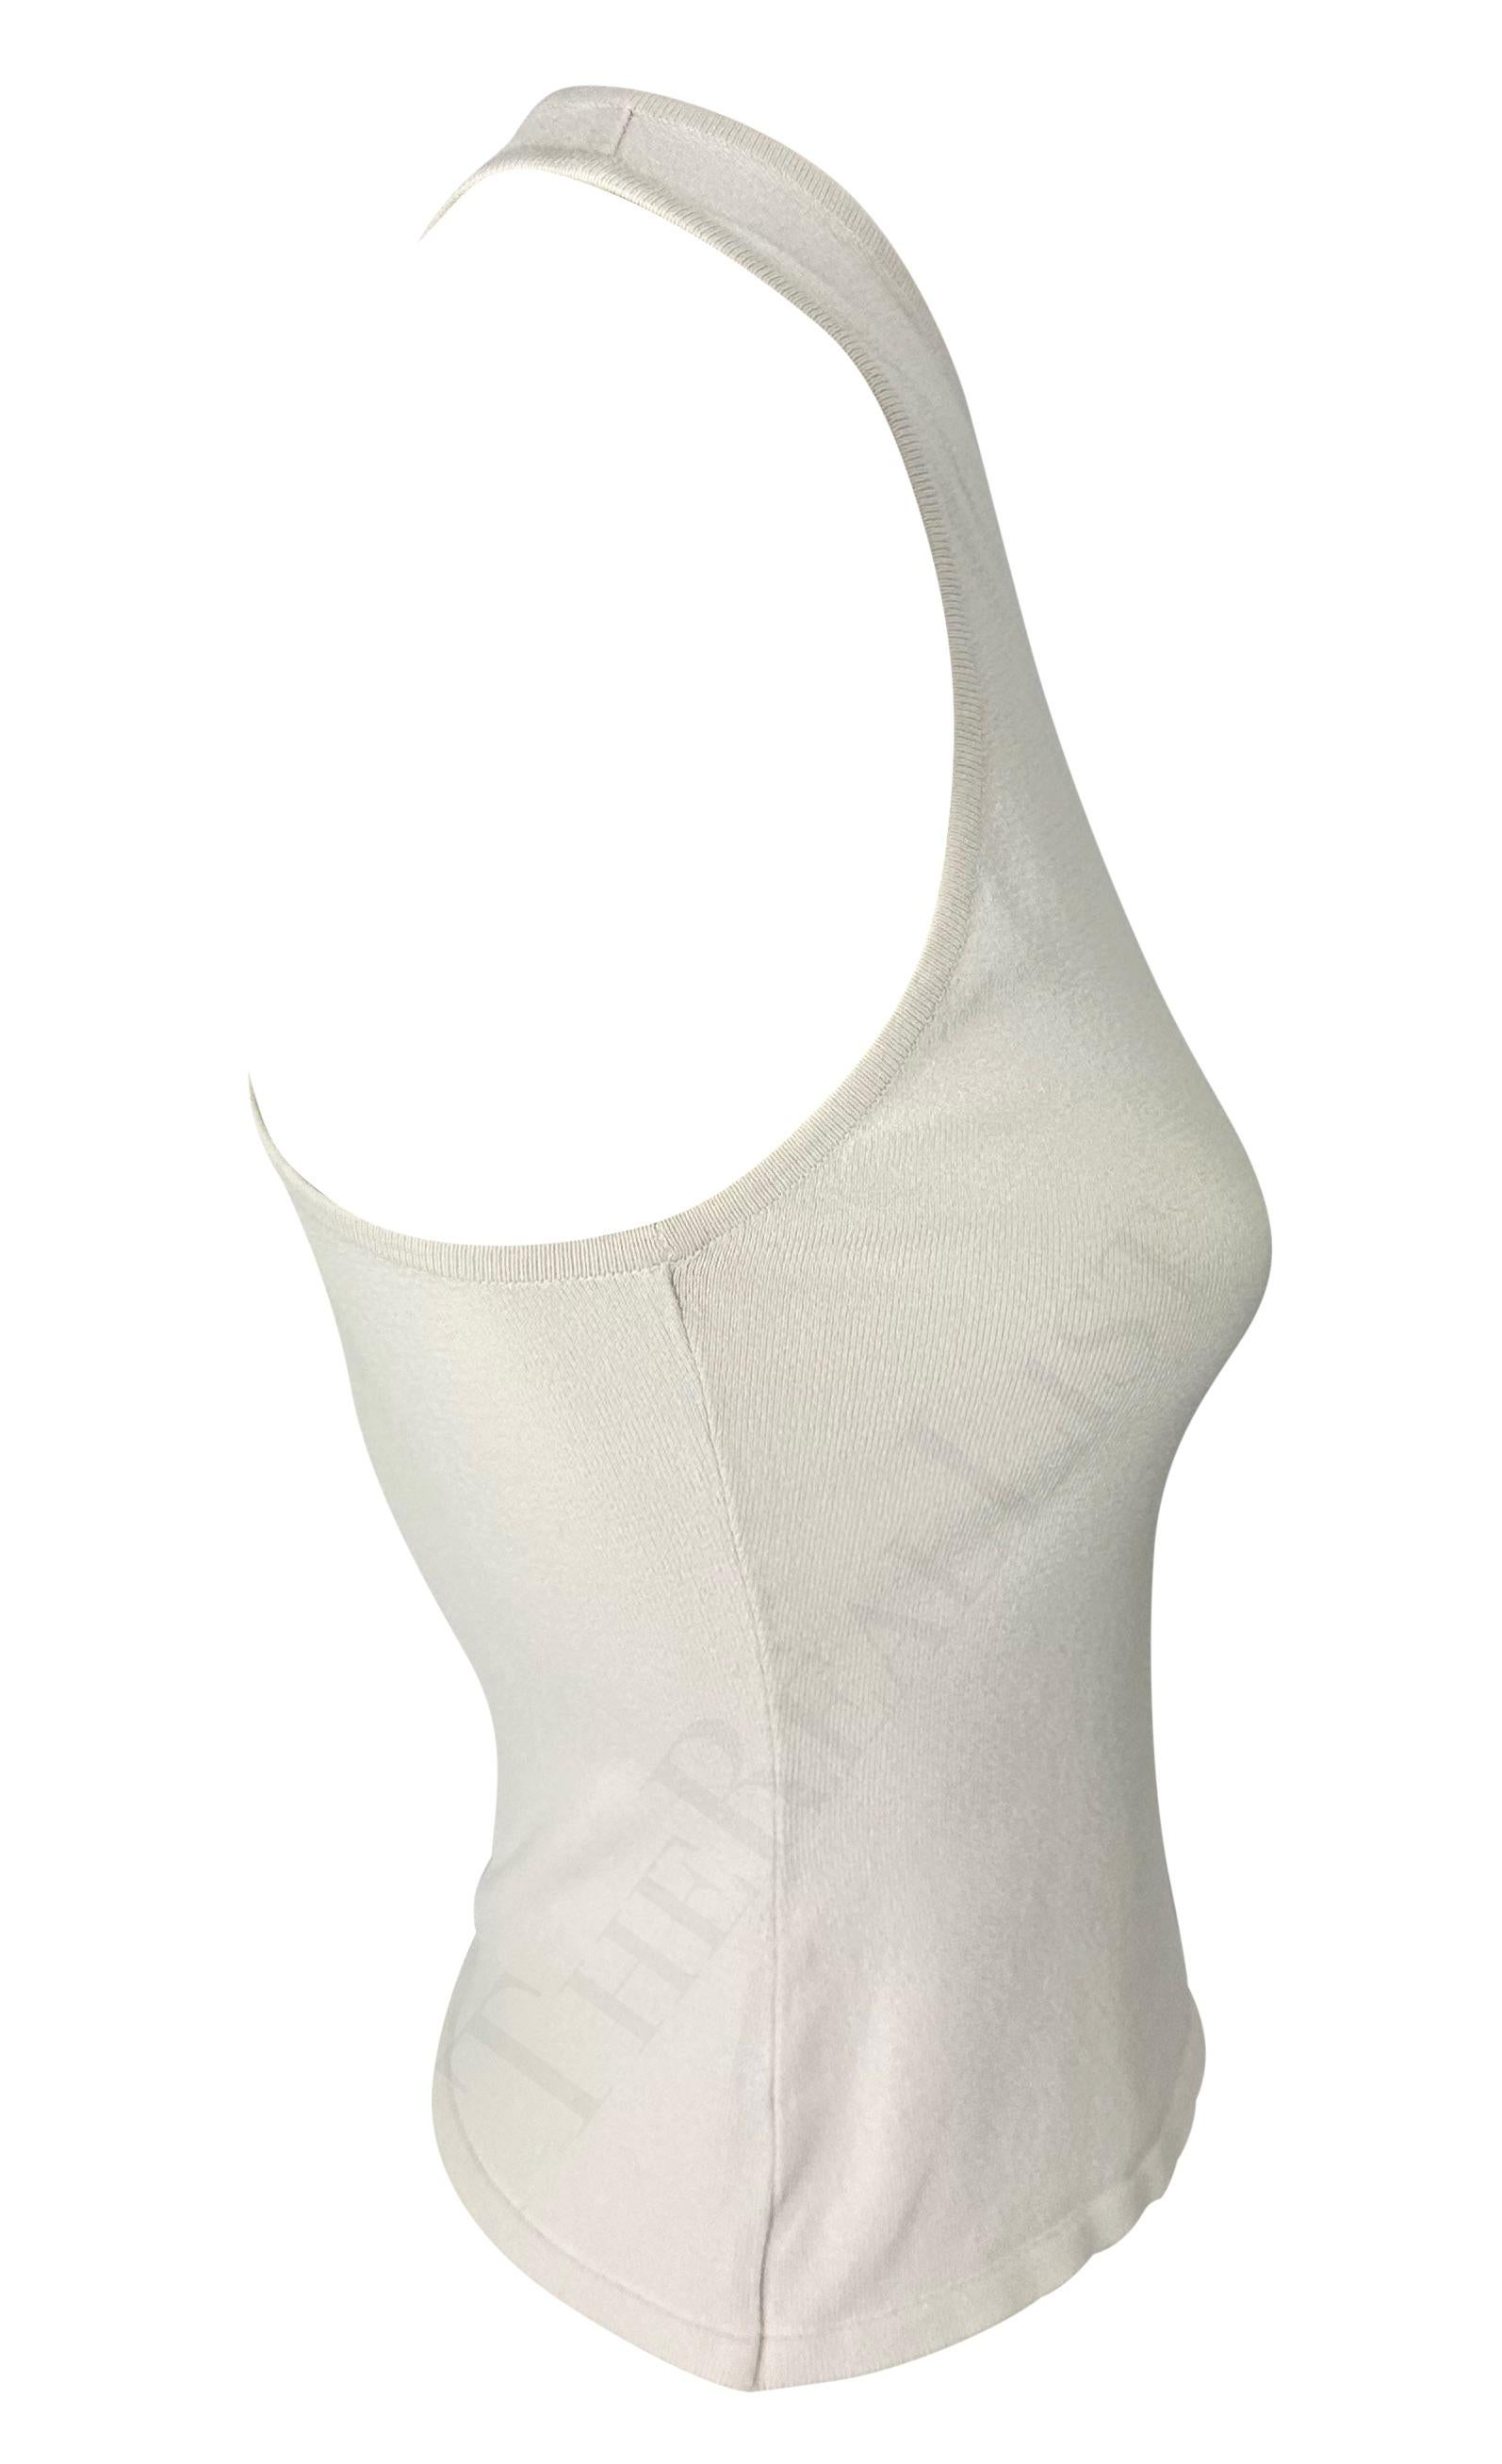 TheRealList presents: a sleek Tom Ford designed take on a Gucci racer back tank top. The fitted tank top features a high v-neck in the front and a tight racerback. This top was created by Tom Ford for the Spring/Summer 1998 collection and is the